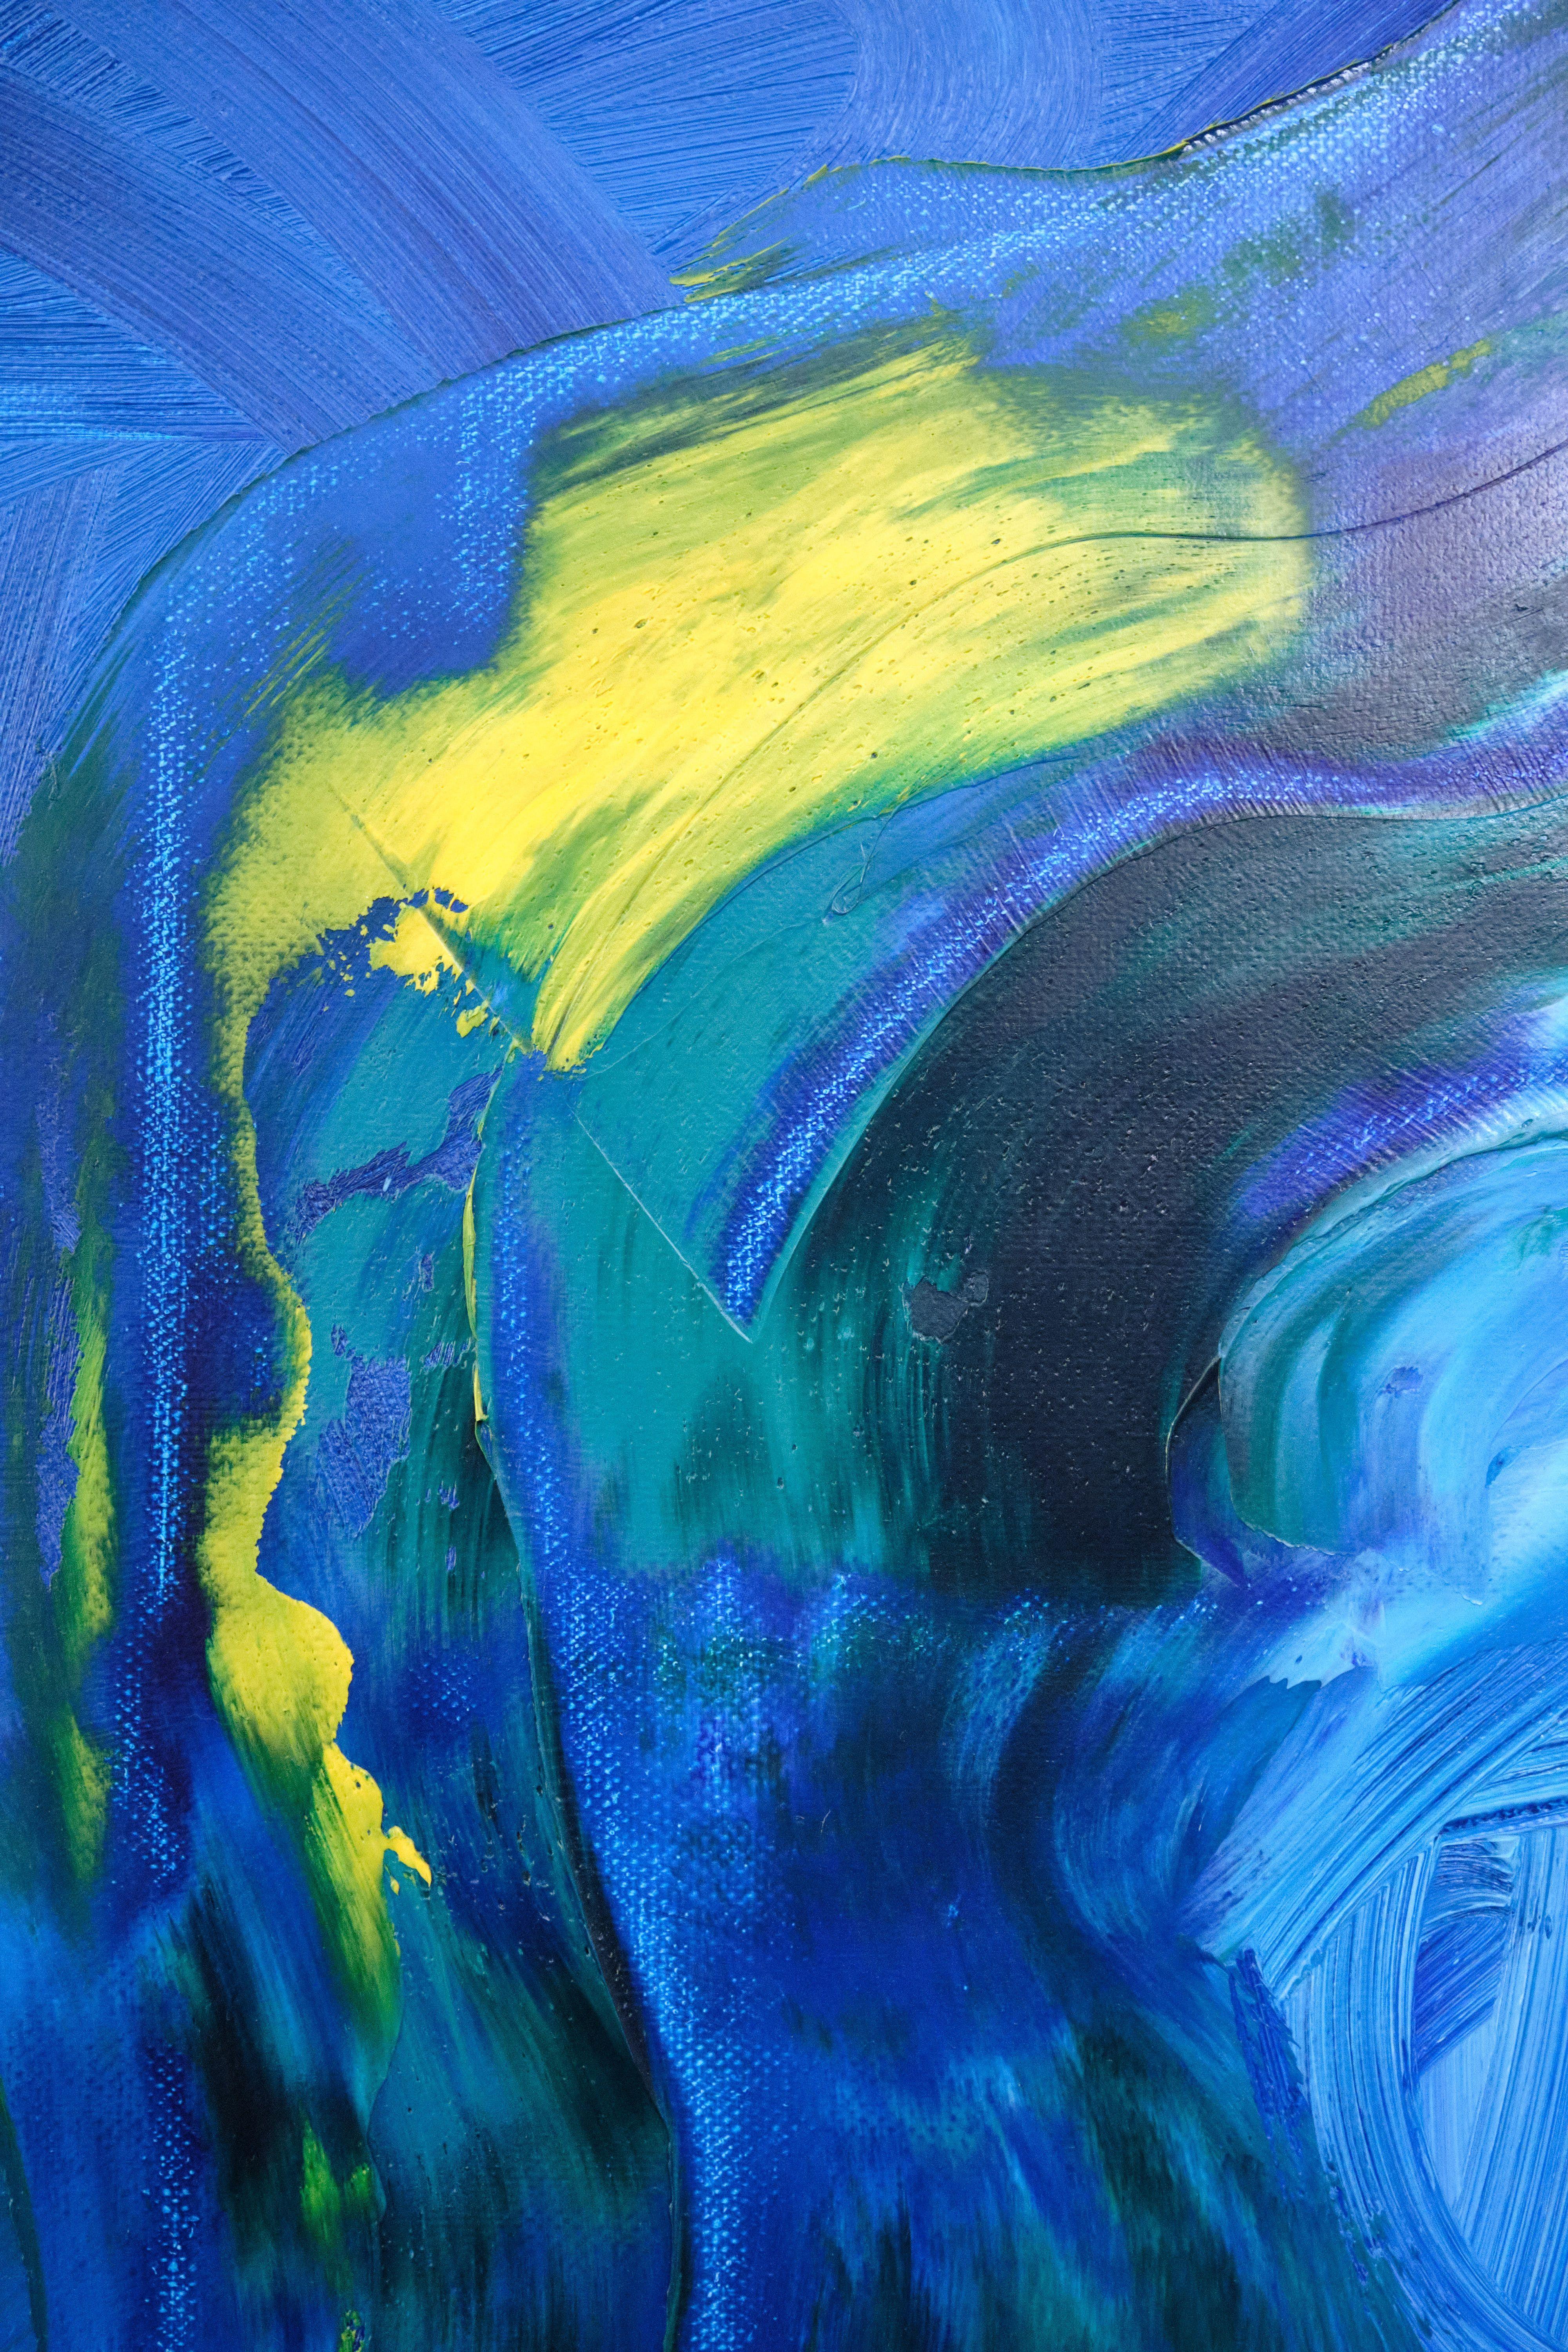 Blue oil was layered and swirled with a small brush, followed by a few strokes of green/turquoise with a palette knife, and finalised with three streaks of yellow.  This is part of the artistâ€™s ongoing practice, where he intuitively paints for a